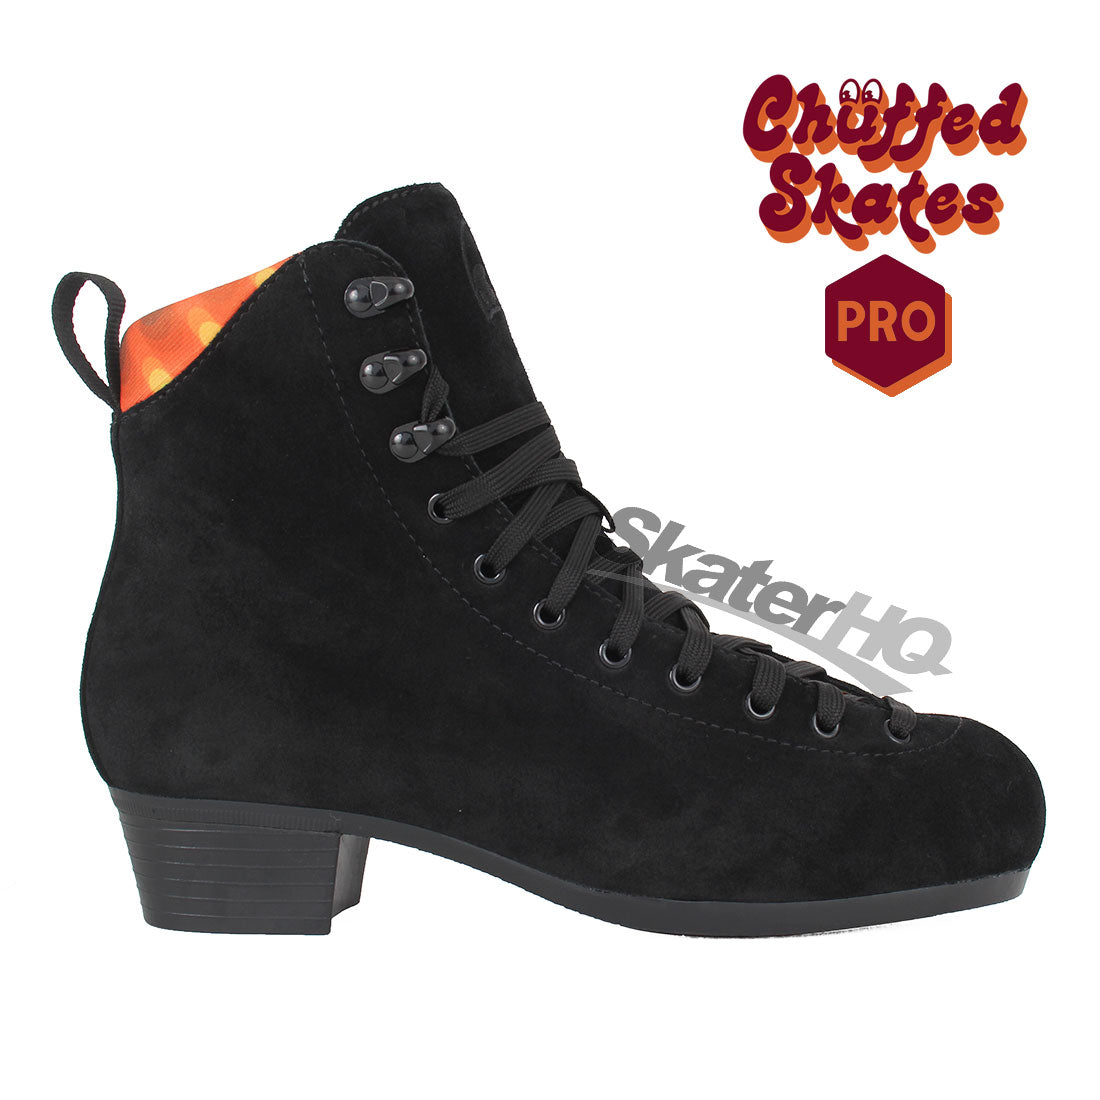 Chuffed Pro Boot Black 10US Roller Skate Boots